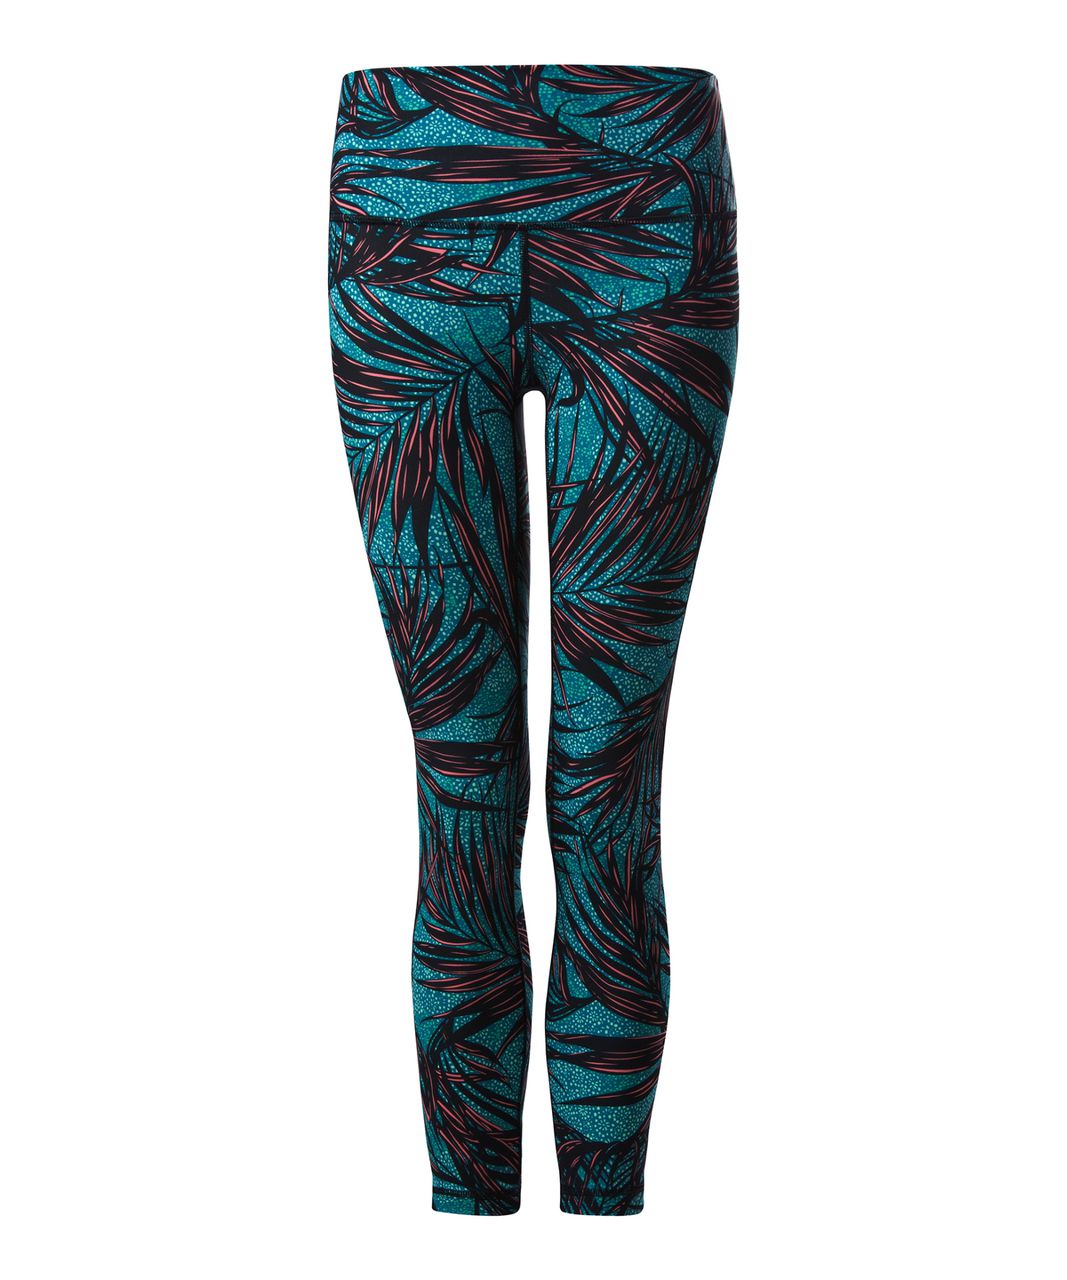 Lululemon High Times Pant - Palm Lace Tofino Teal Multi